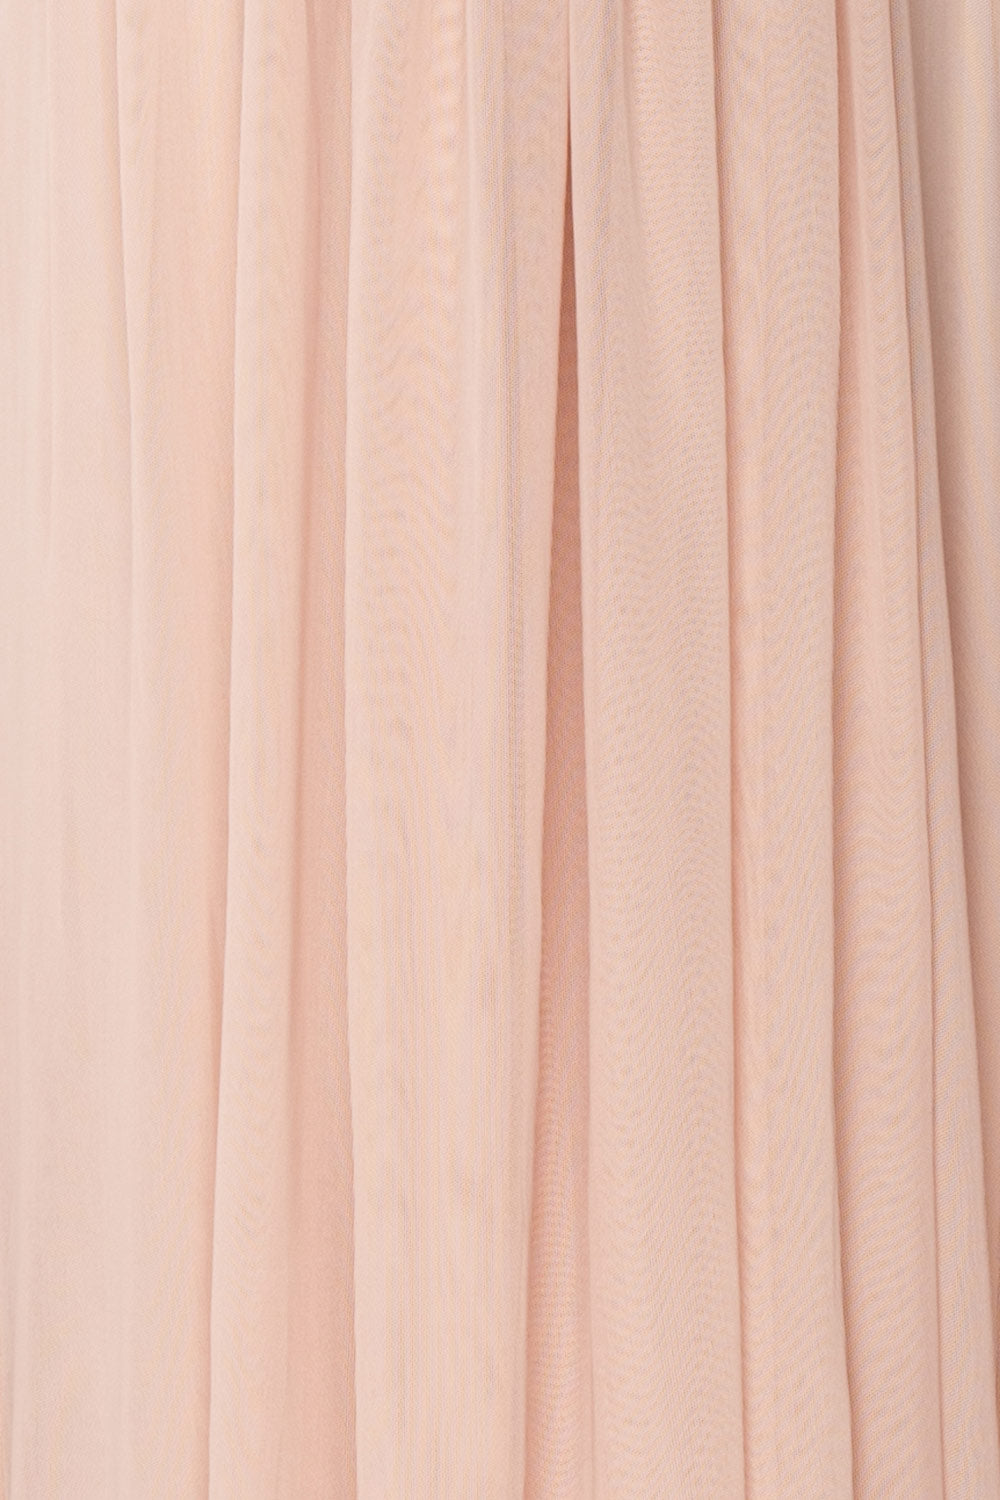 Tevaiho | Pink Gown w/ Silver Cape